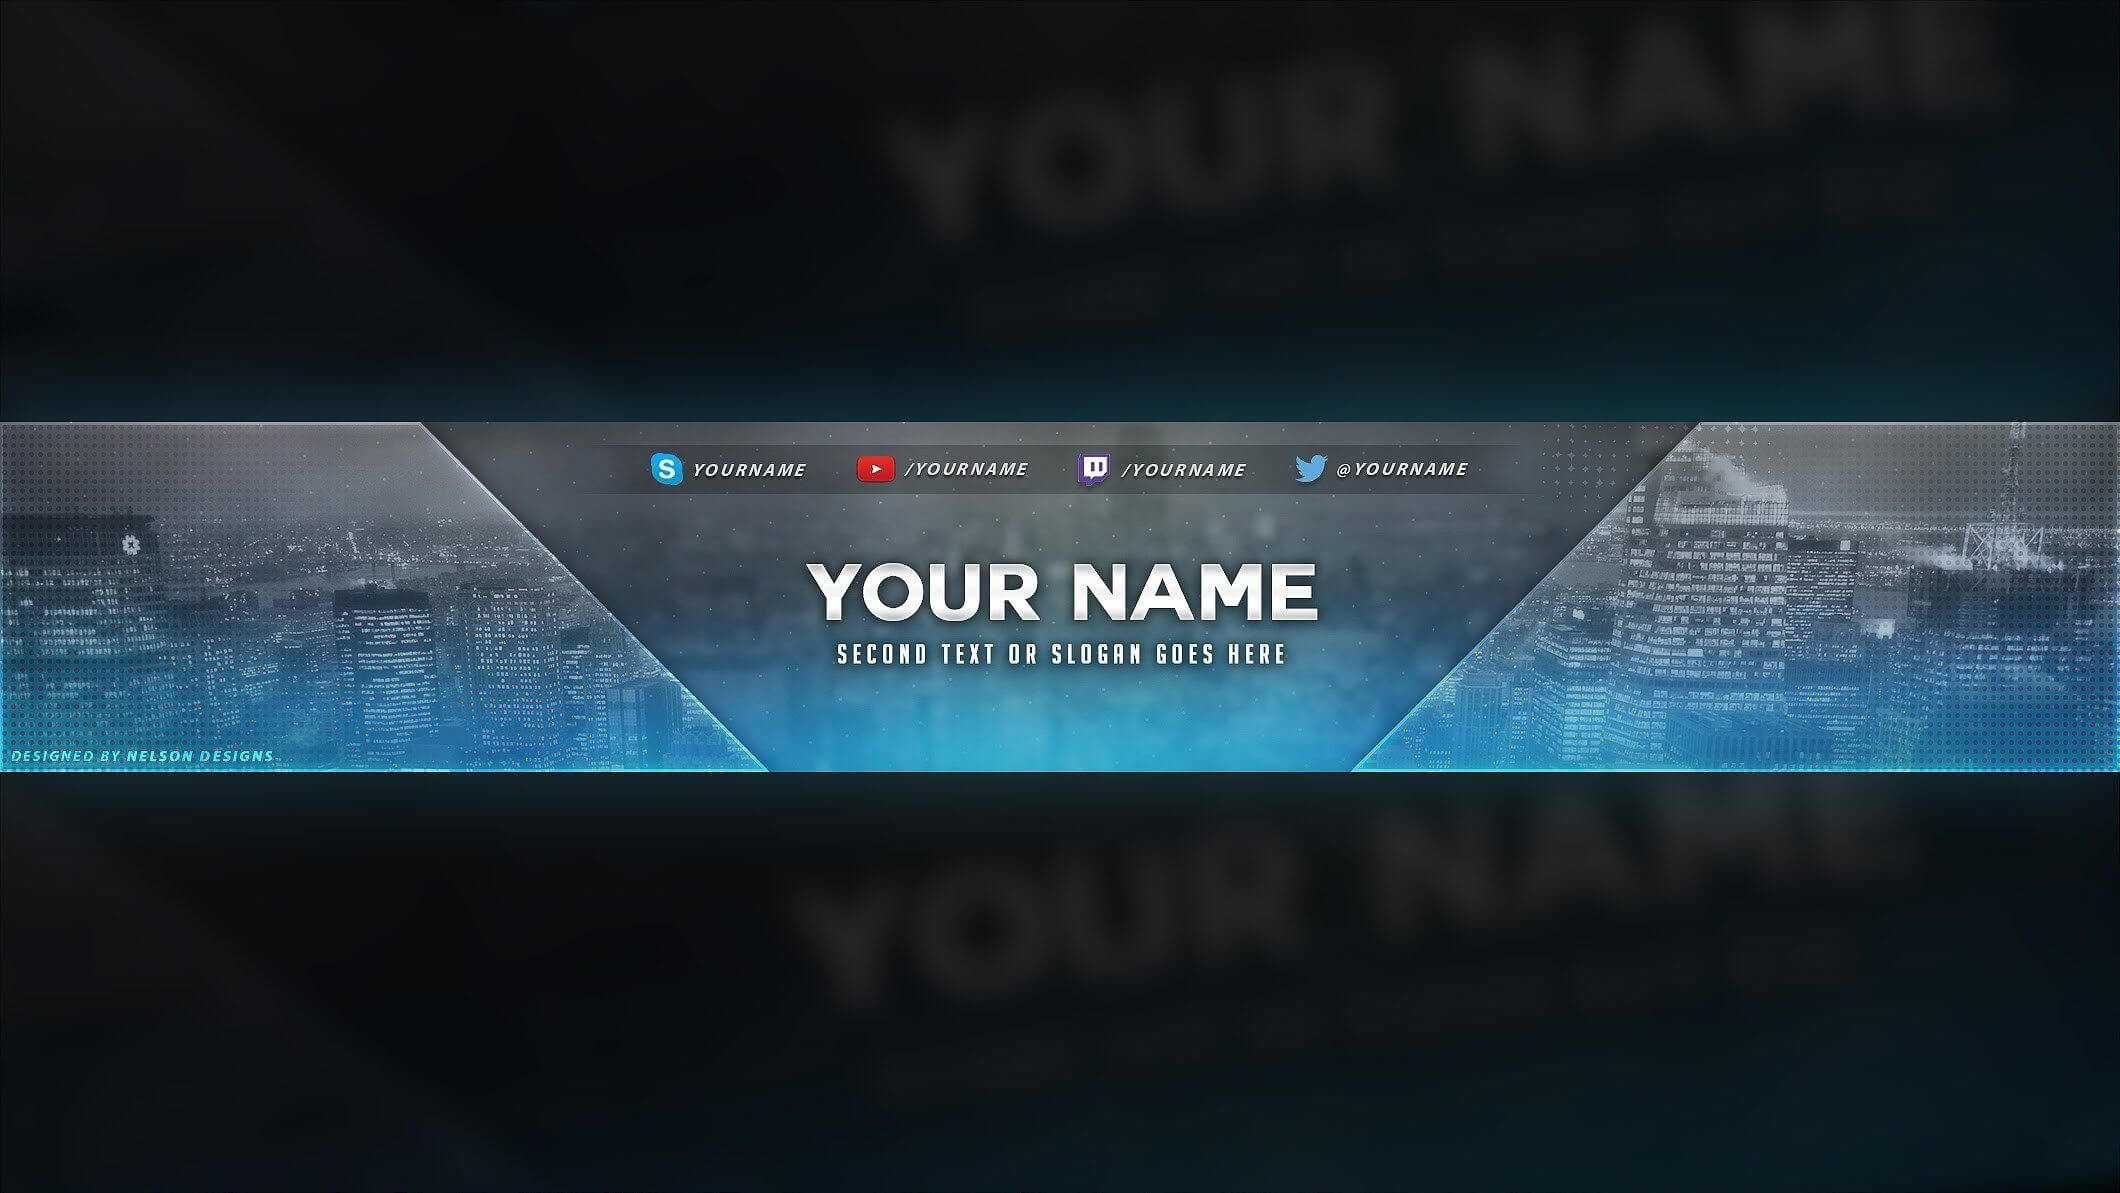 youtube banner template 2560x1440